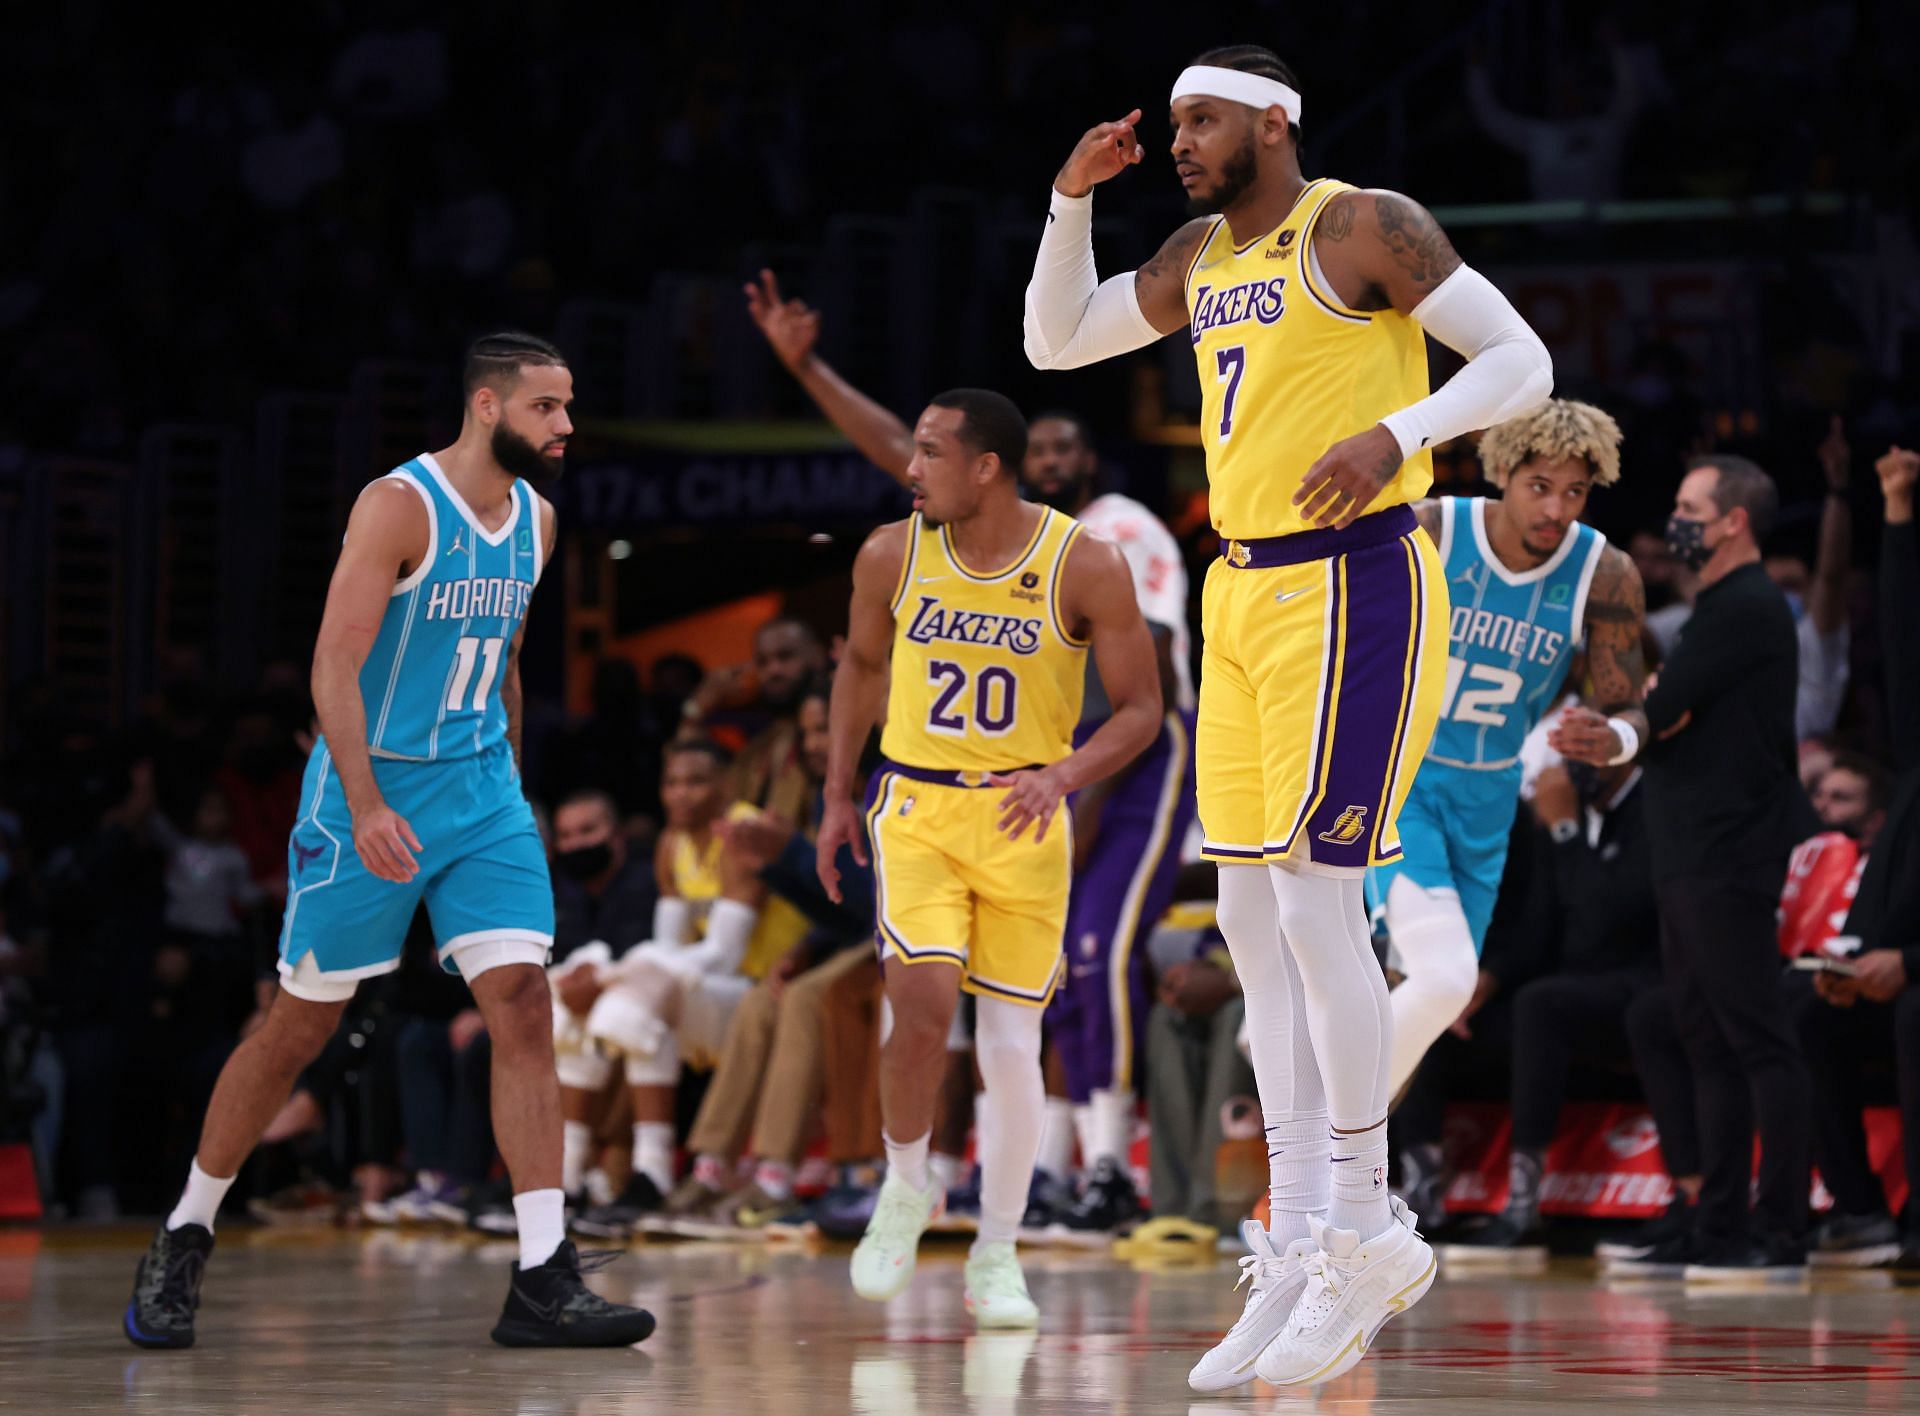 Carmelo Anthony with his signature celebration after hitting a three-pointer against the Hornets